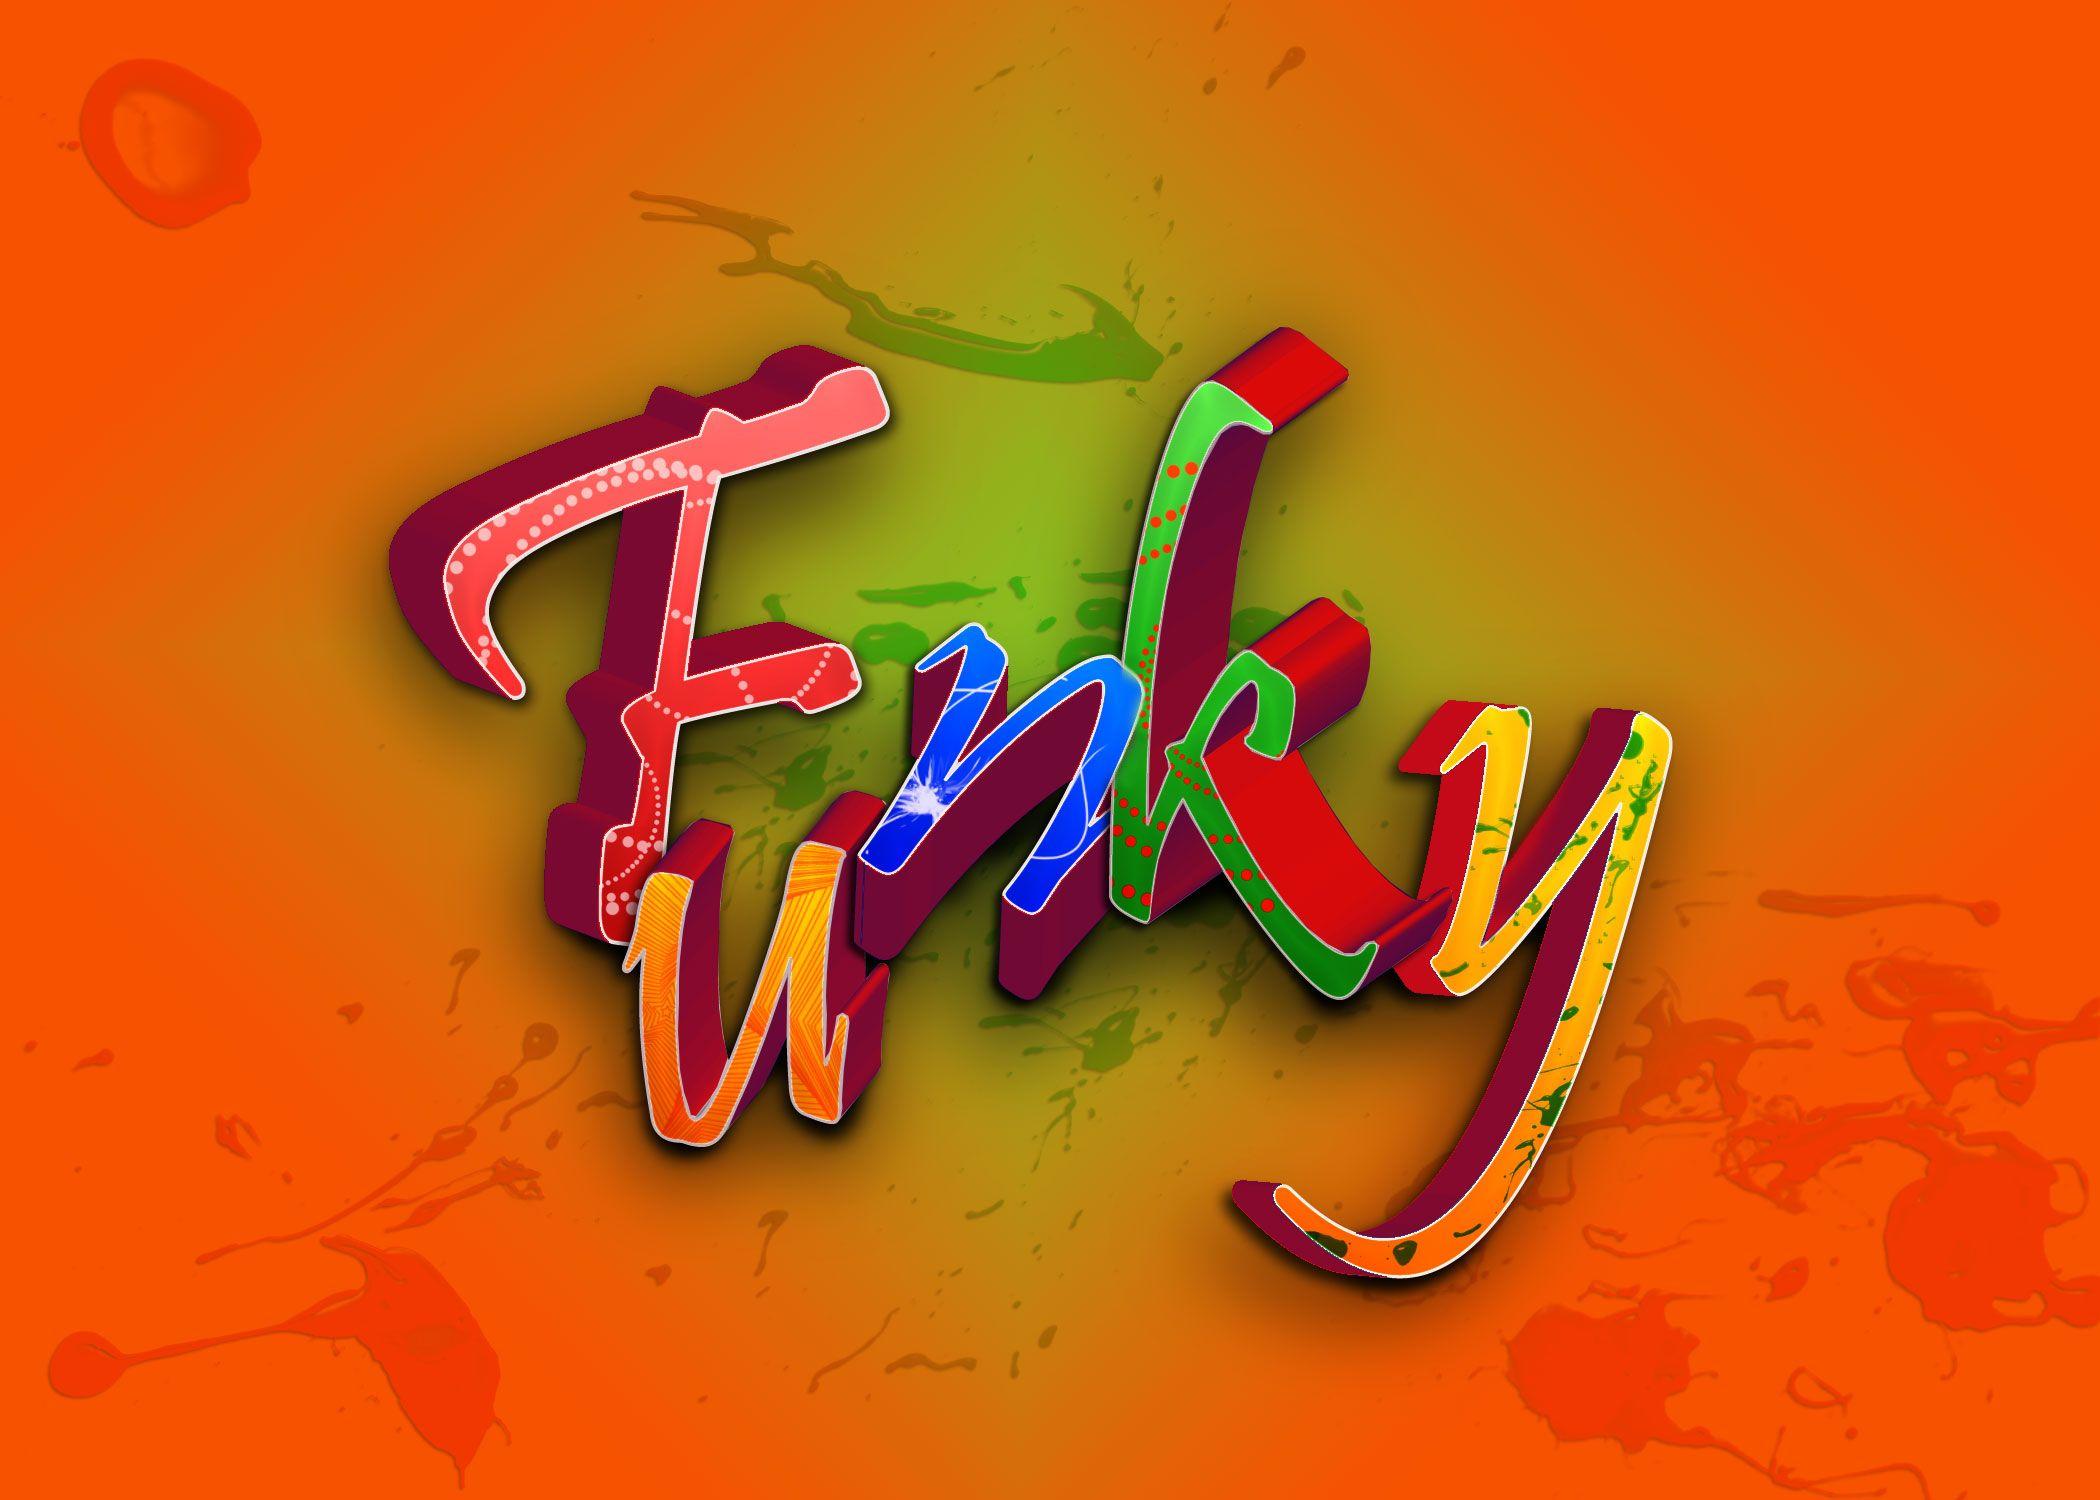 Funky Wallpapers Top Free Funky Backgrounds Wallpaperaccess